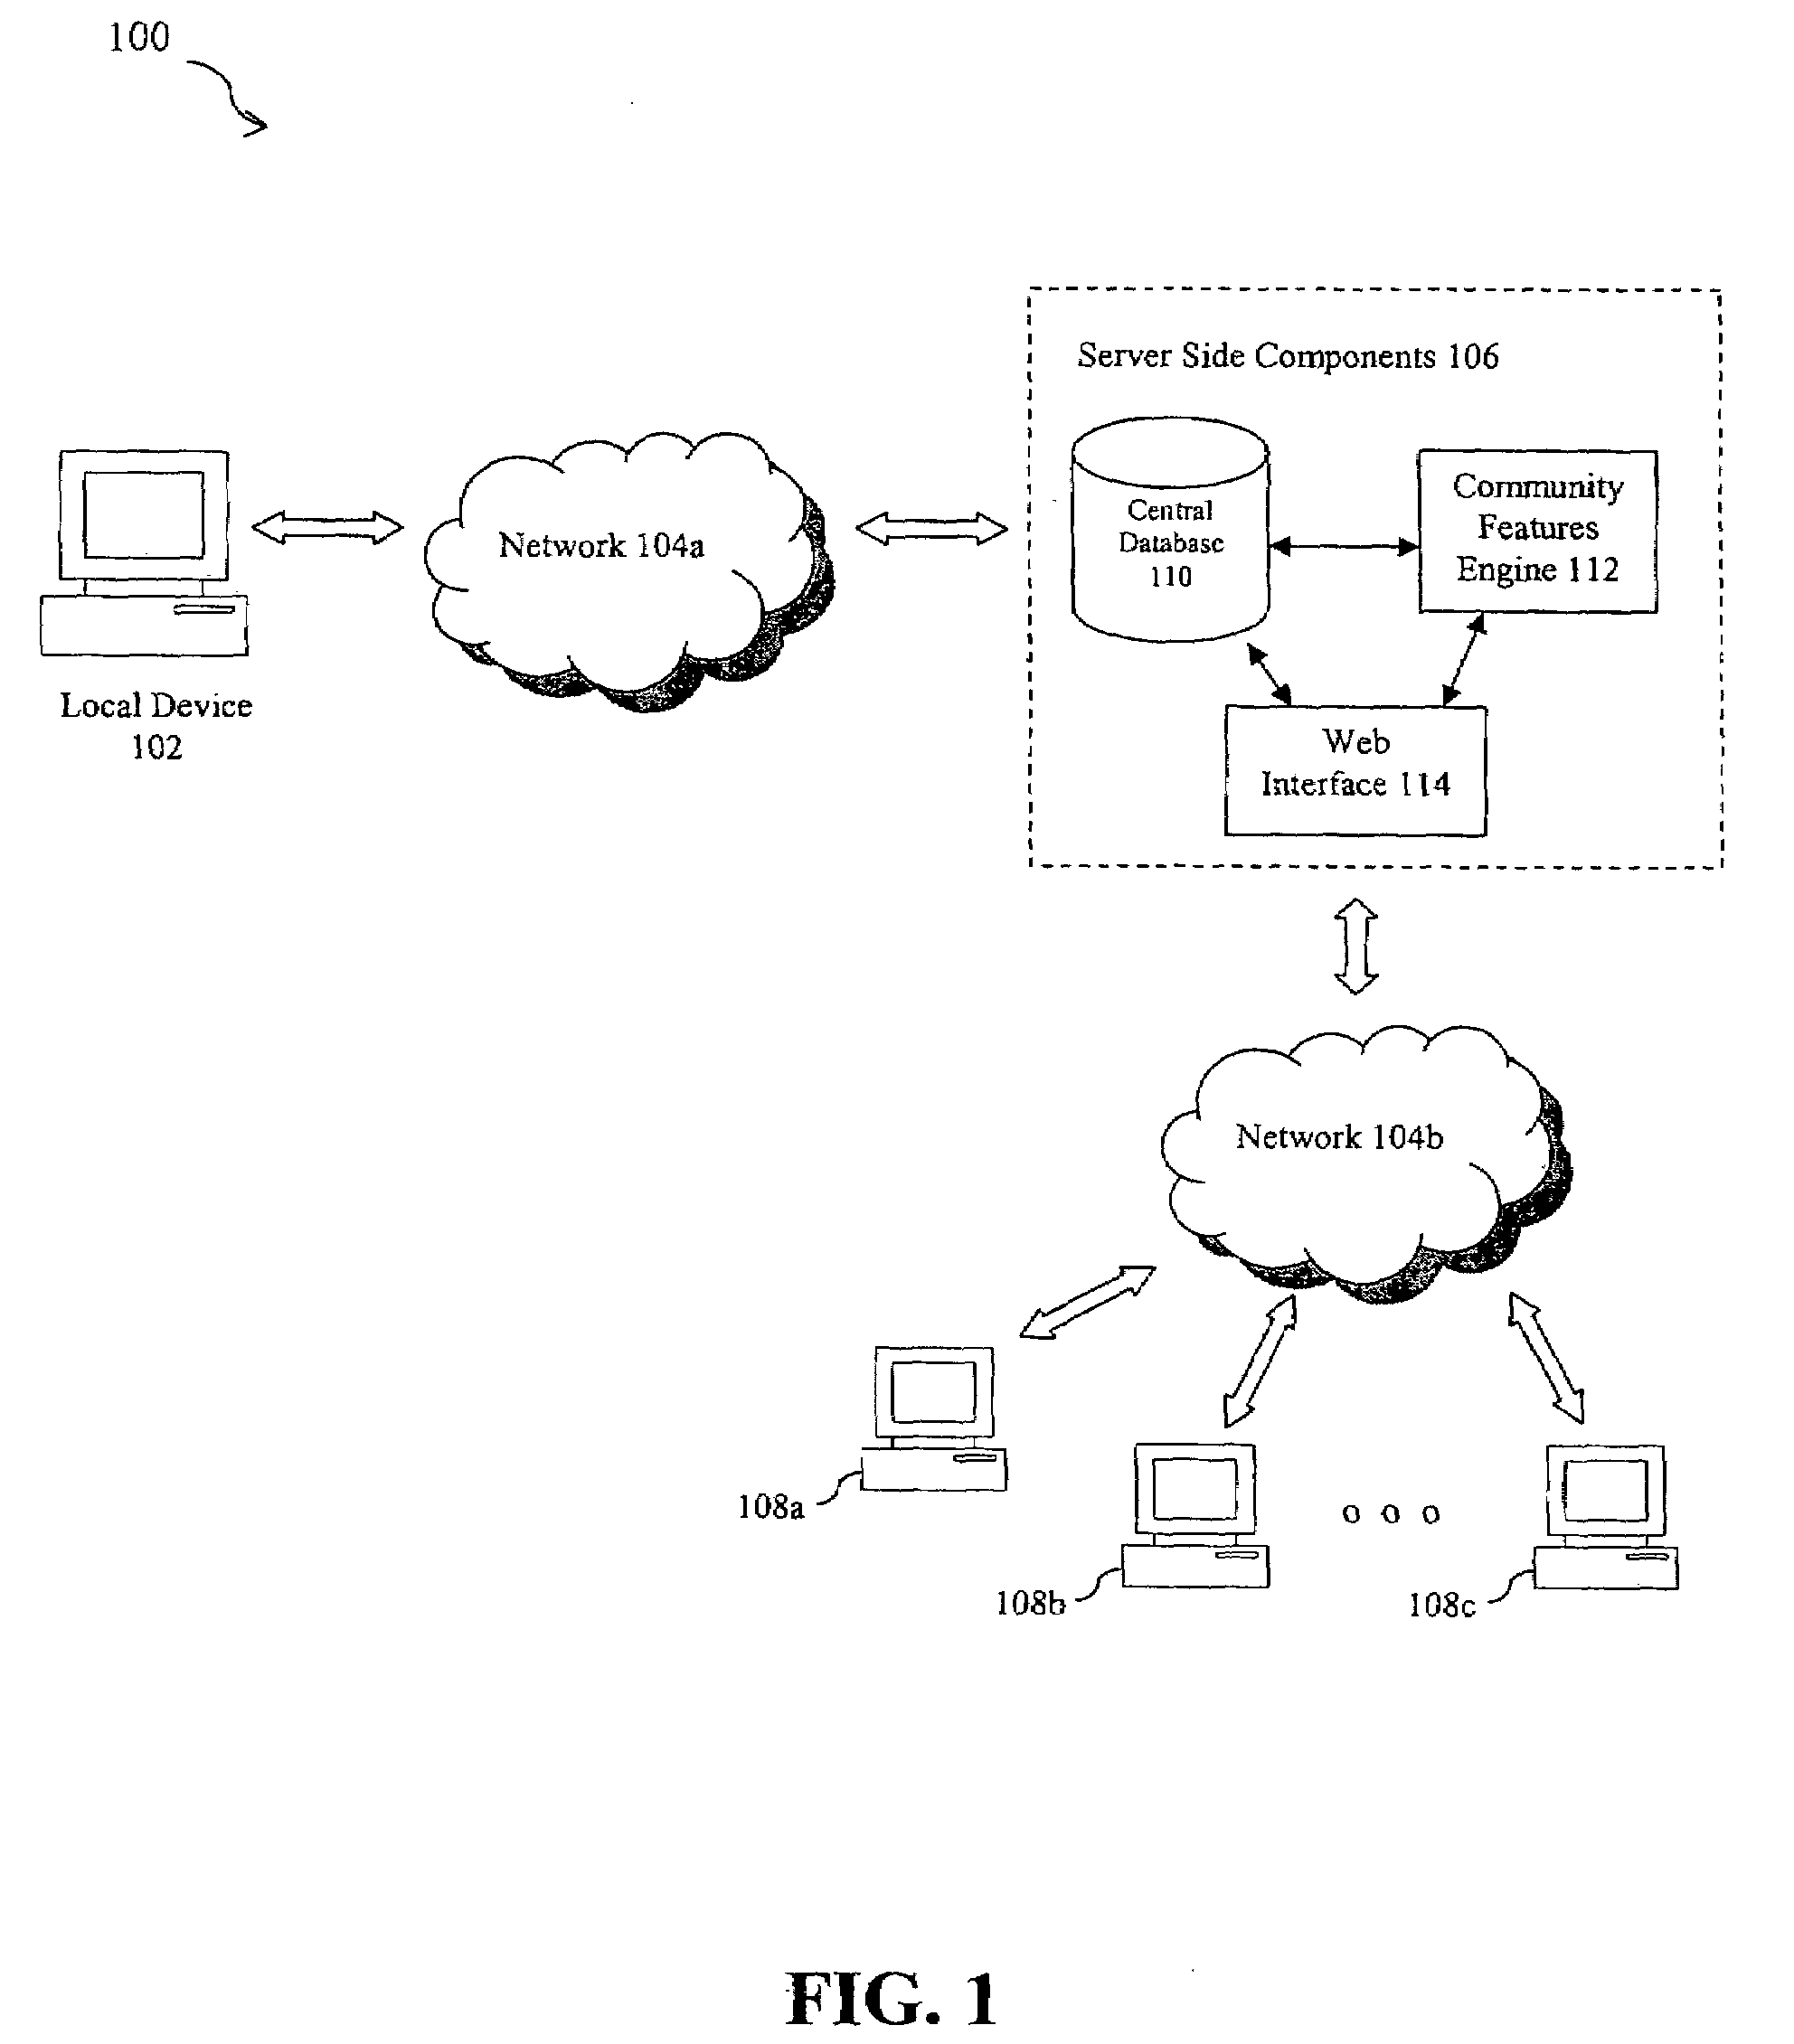 System, method and computer program product for dynamically extracting and sharing event information from an executing software application